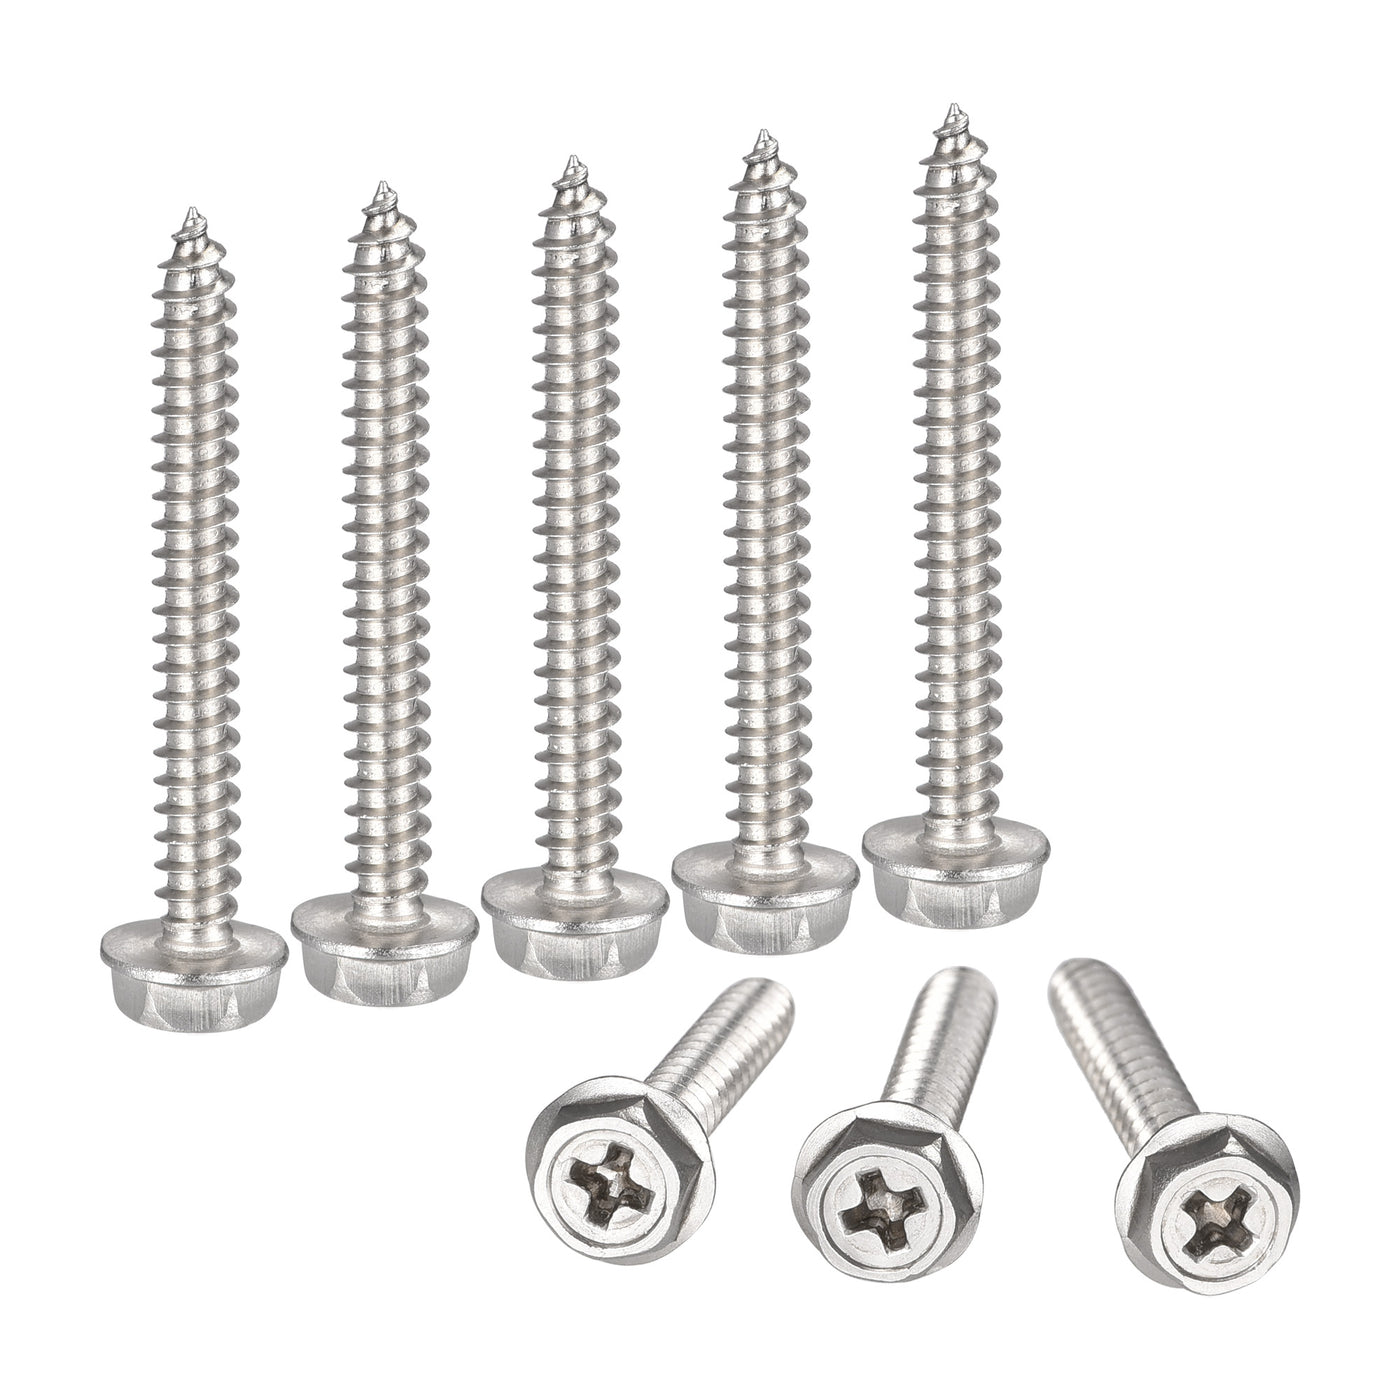 uxcell Uxcell Phillips Hex Washer Self Tapping Screws, M4 x 35mm 304 Stainless Steel Hex Flange Sheet Metal Screw 100pcs